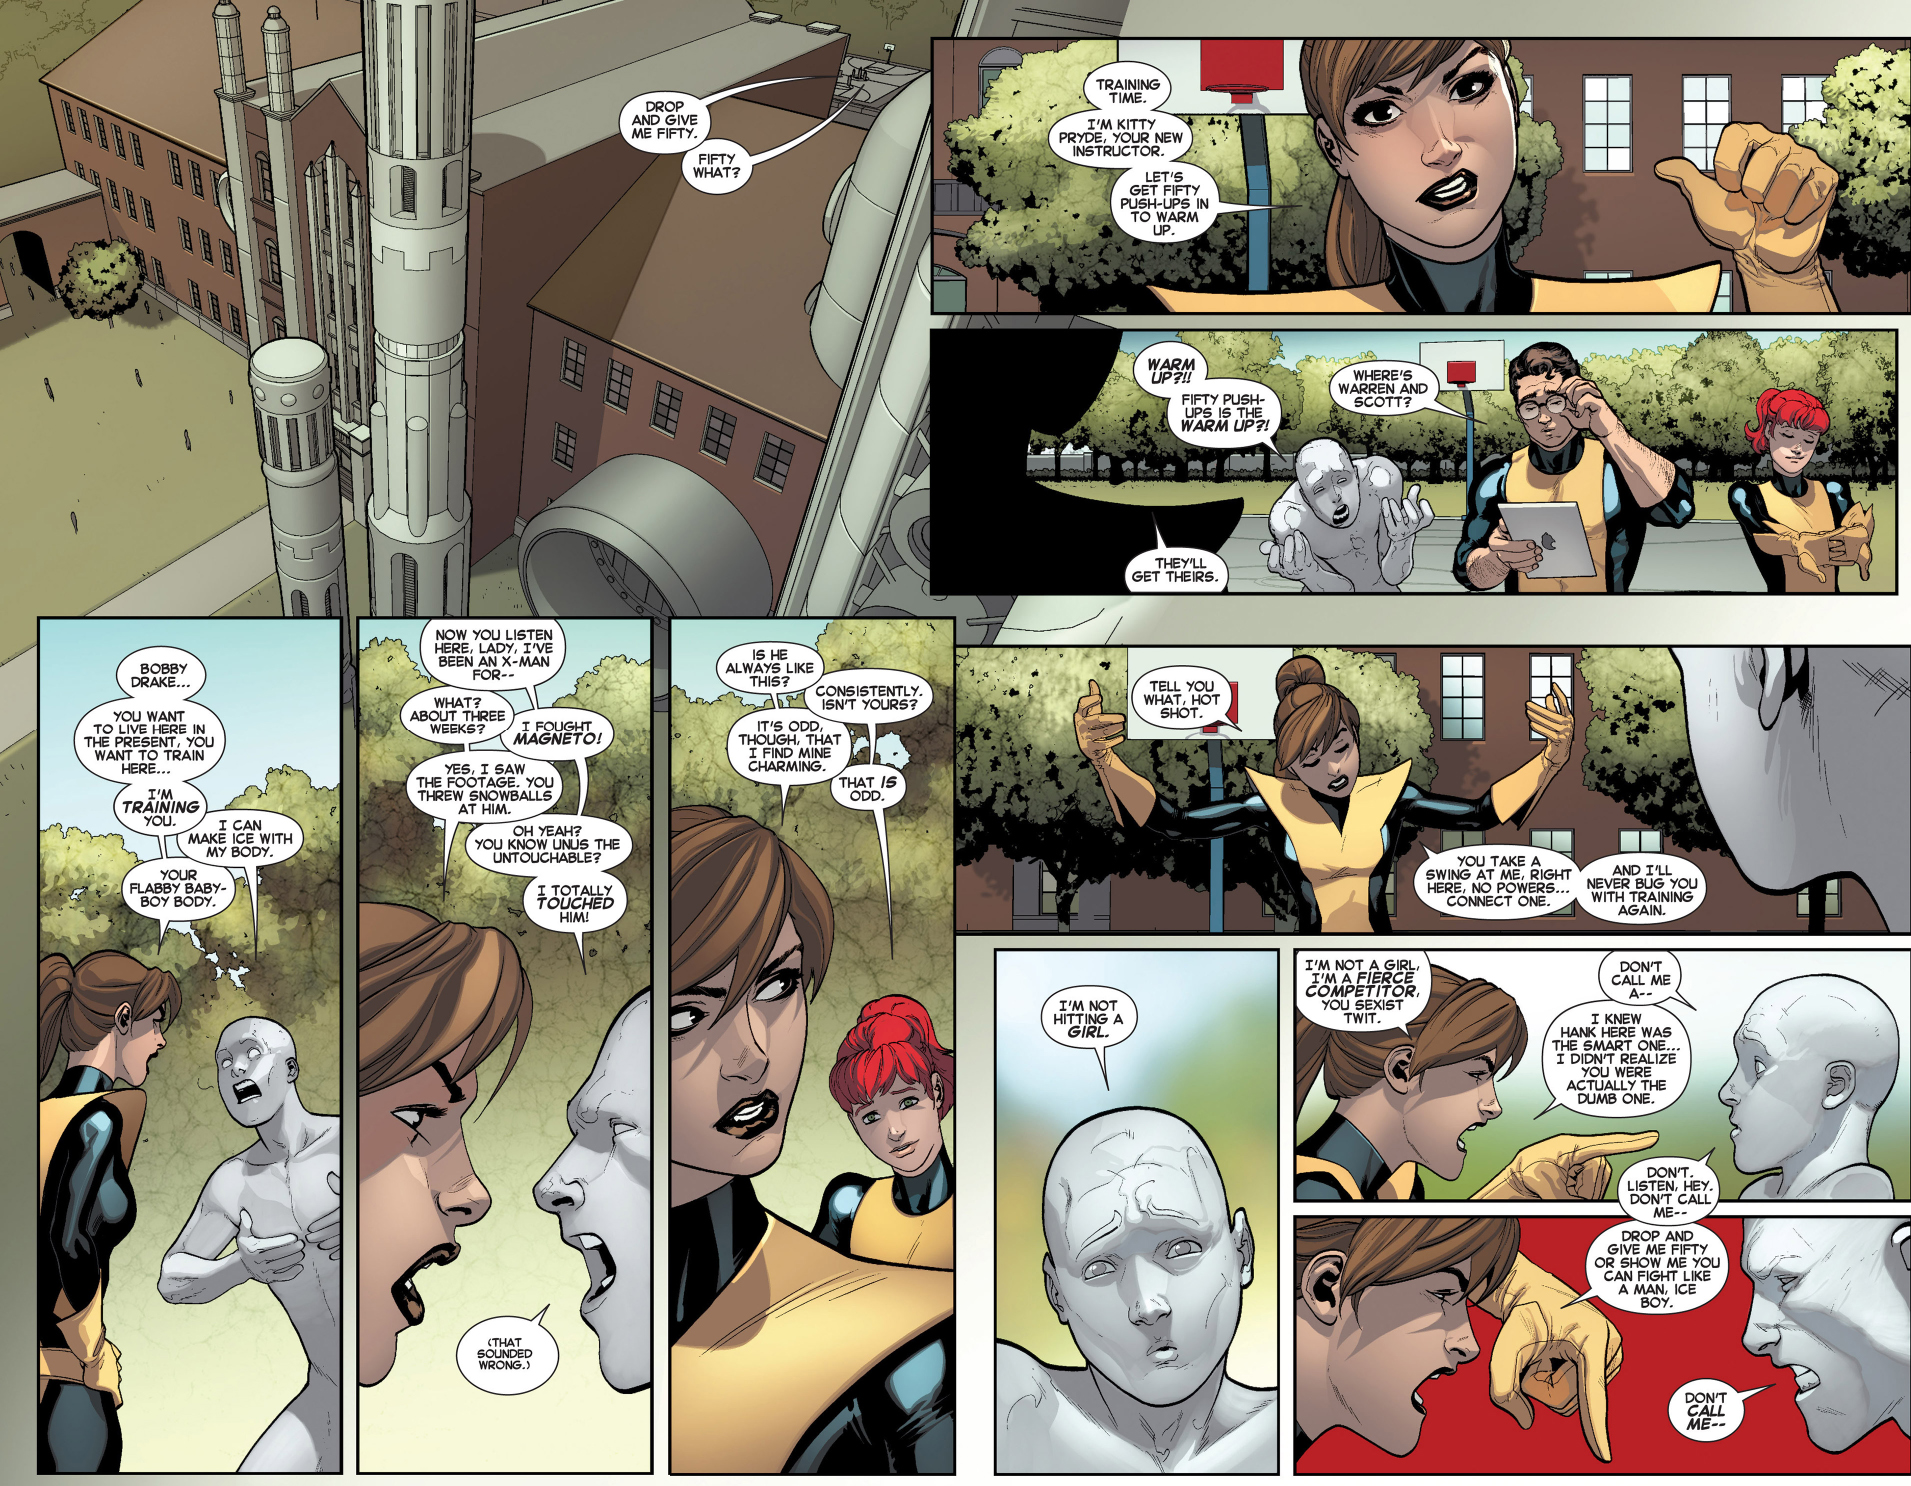 kitty pryde trains the original 5 iceman